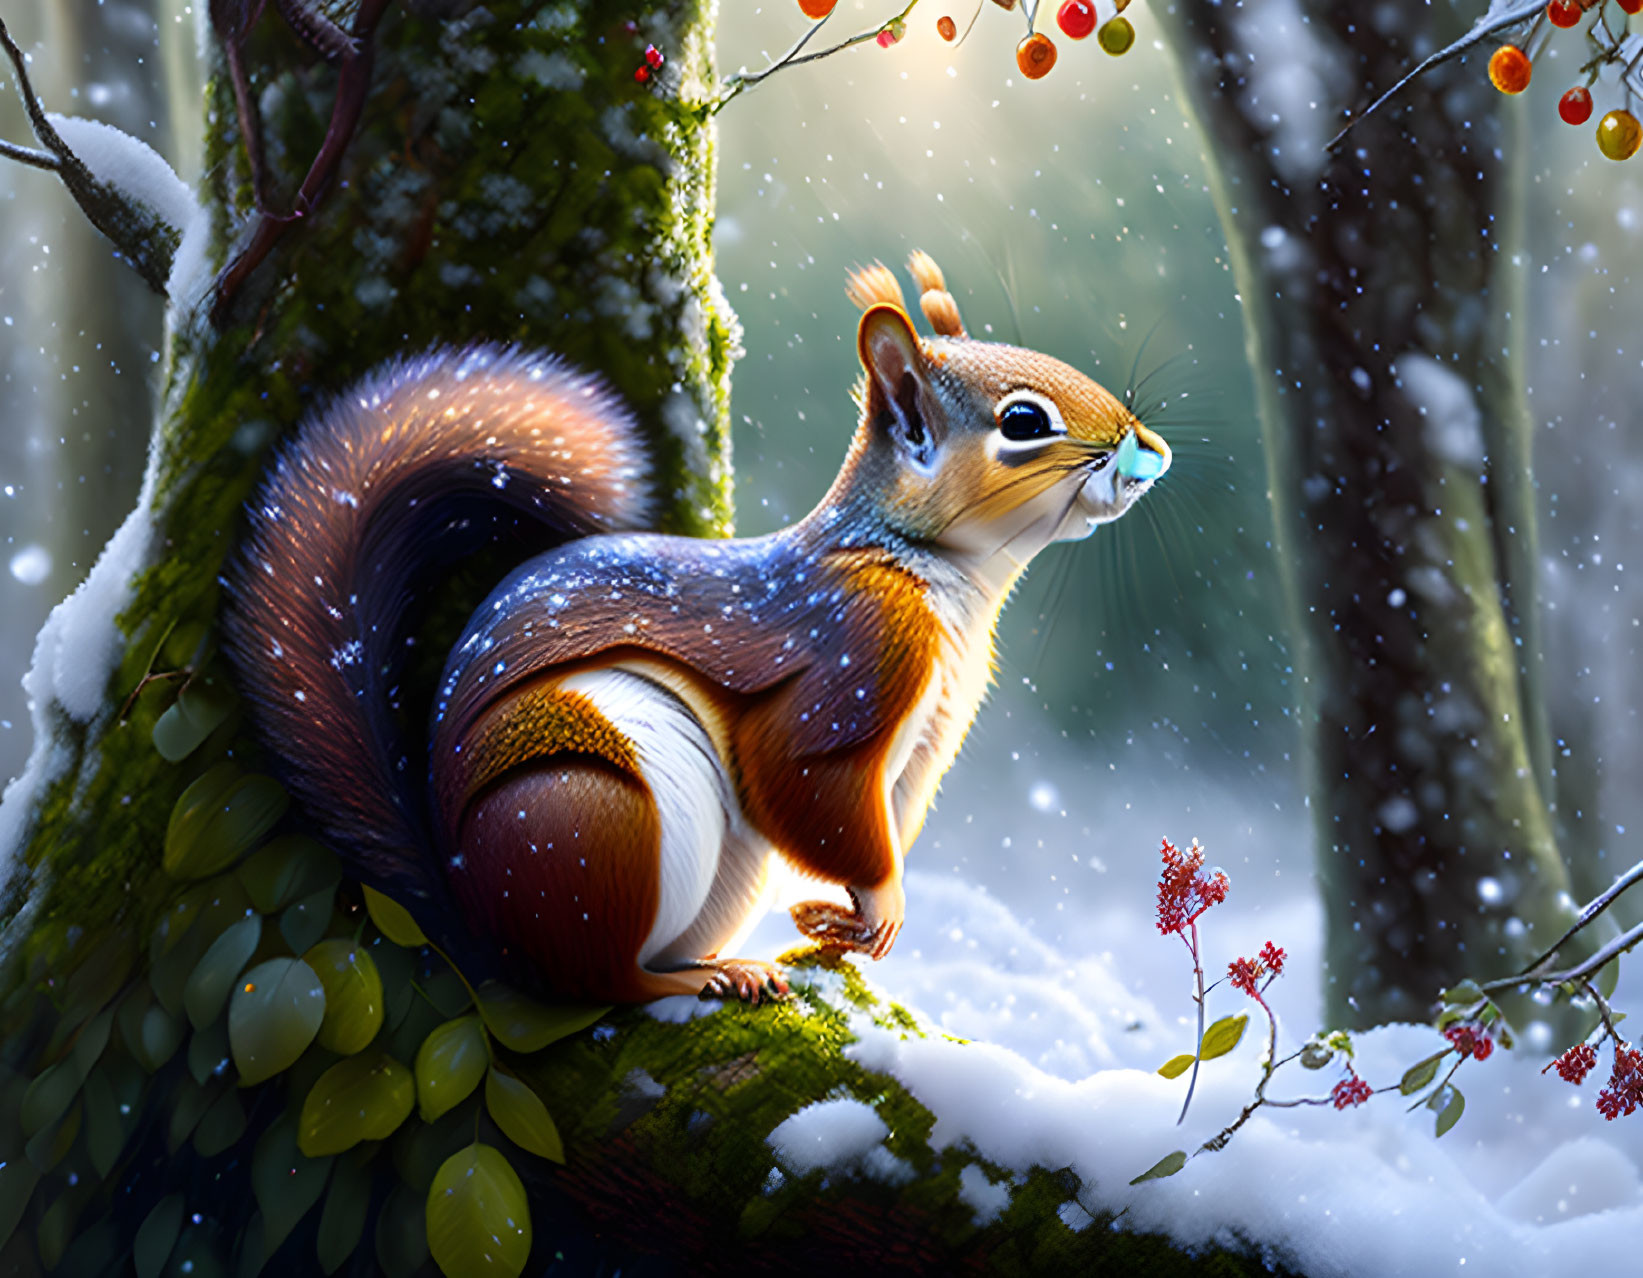 Detailed Illustration: Squirrel on Snowy Tree Branch with Berries